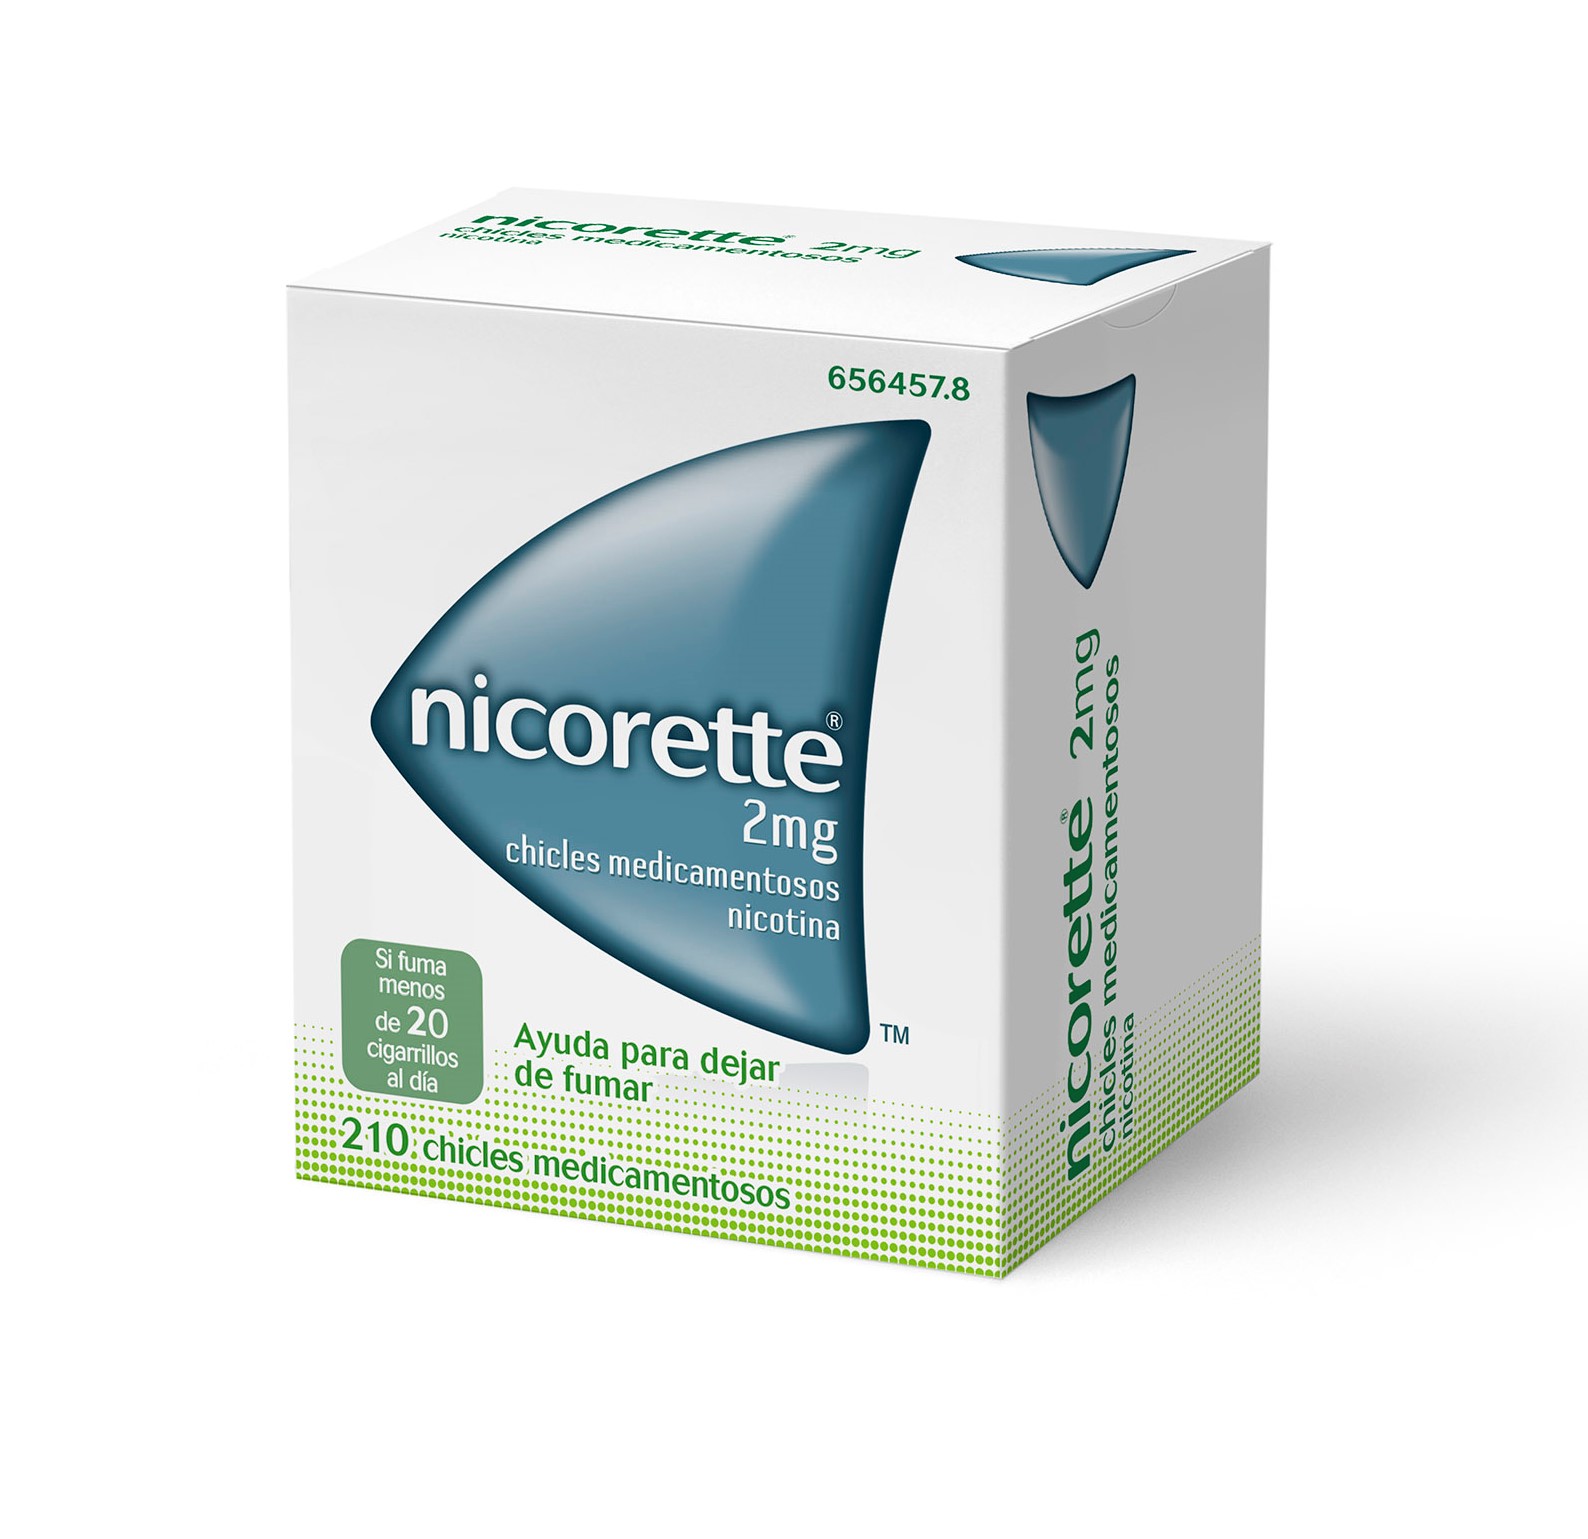 NICORETTE 2 MG CHICLES MEDICAMENTOSOS 210 CHICLES